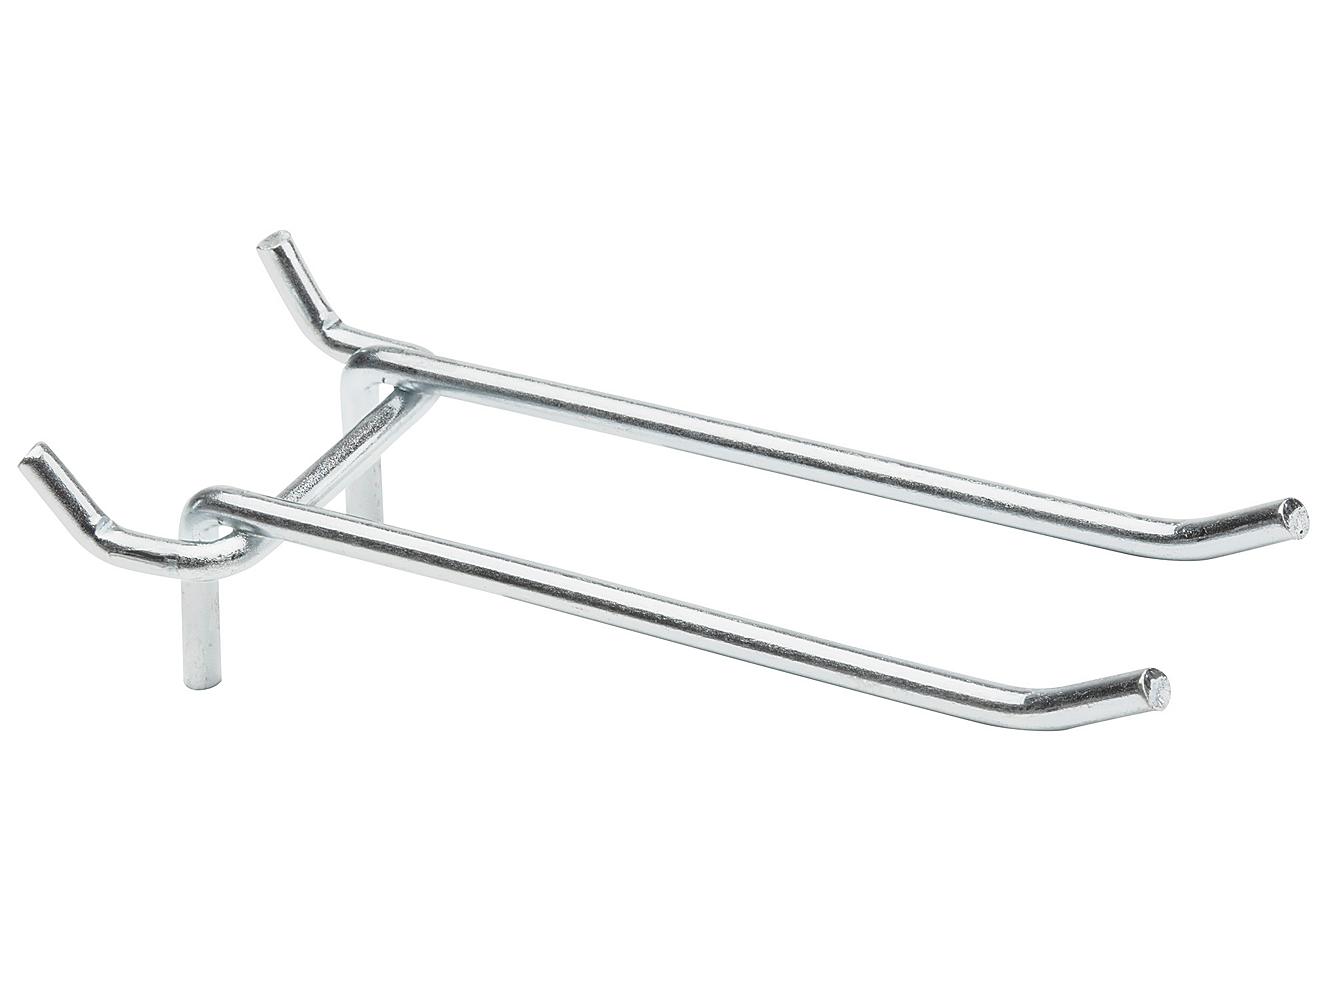 Double Straight Hooks for Pegboard - 5, Zinc-Plated H-2691 - Uline